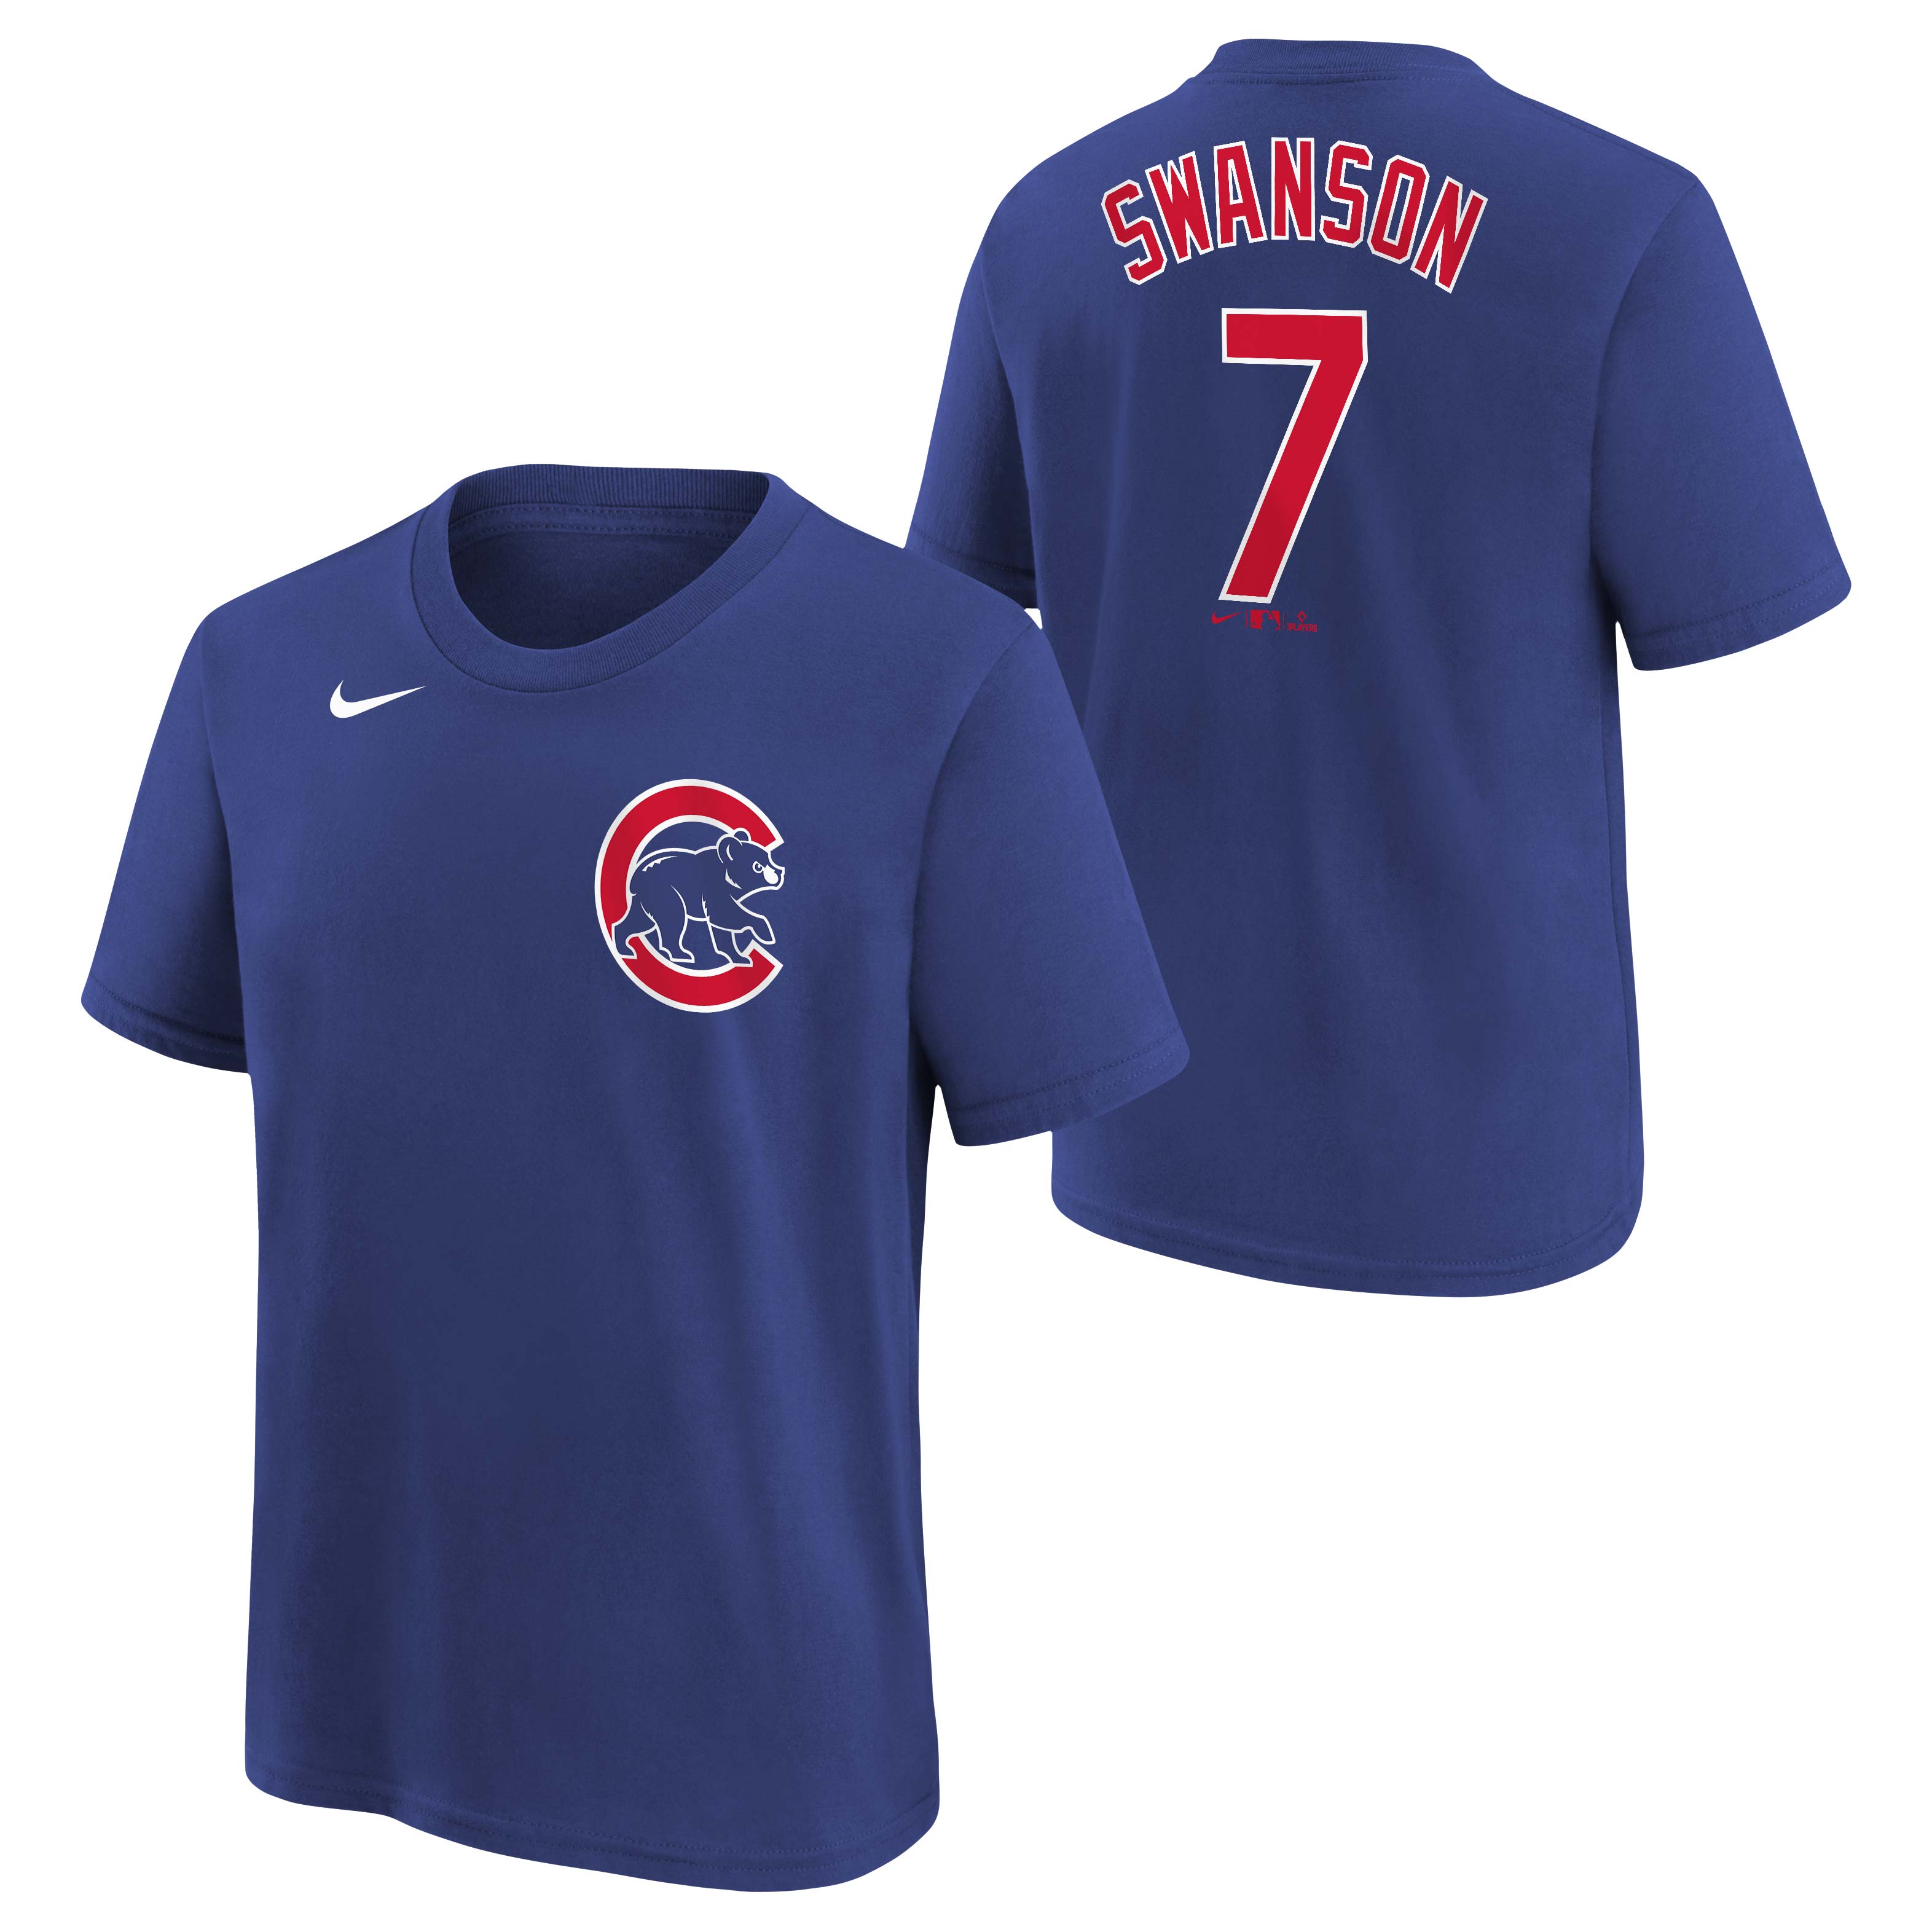 Official Dansby Swanson Jersey, Dansby Swanson Shirts, Baseball Apparel, Dansby  Swanson Cubs Gear